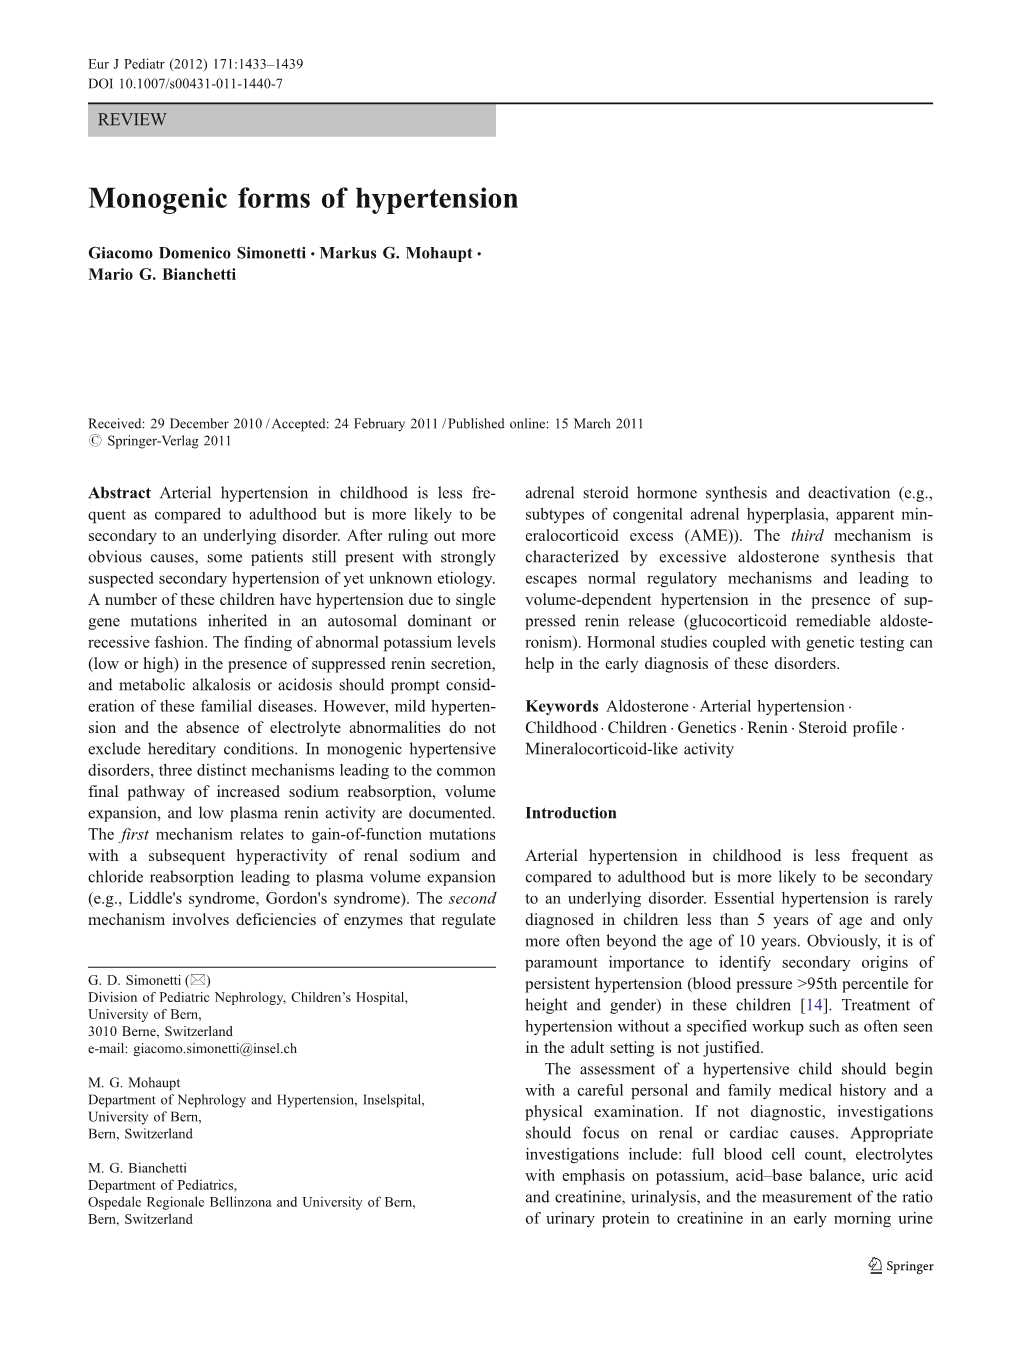 Monogenic Forms of Hypertension